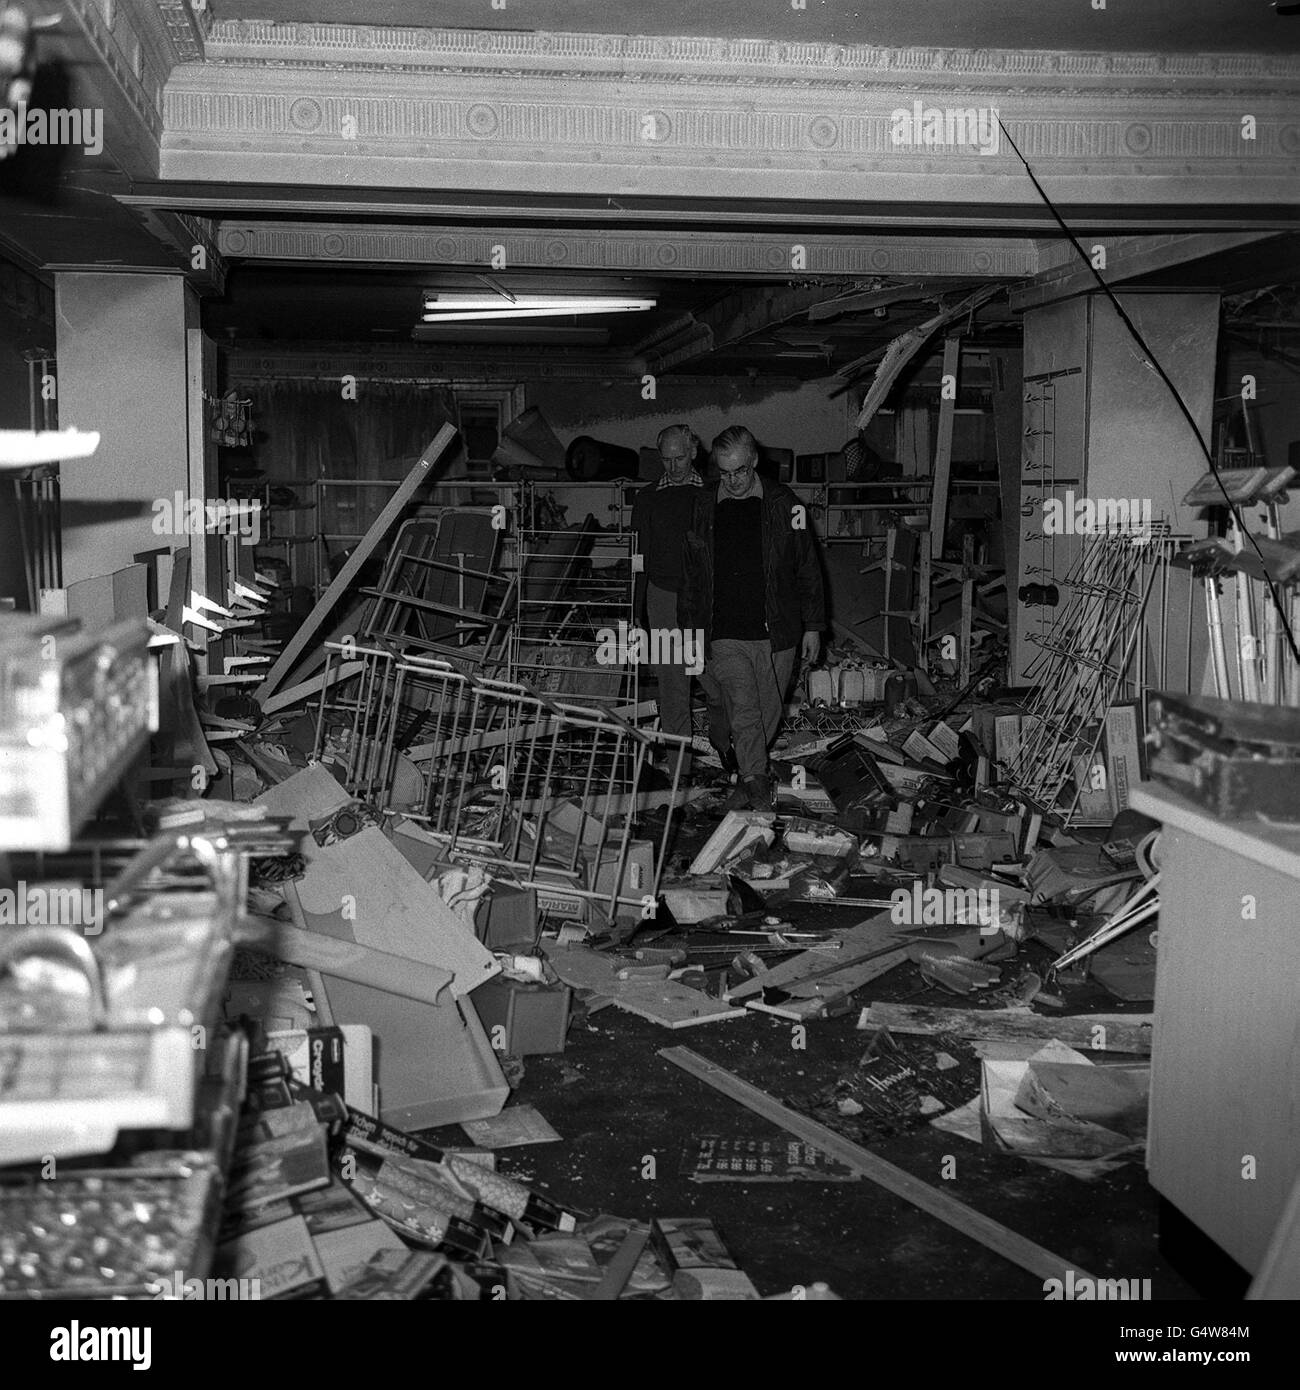 The damage inside Harrods to goods, fittings and the building itself after the 1974 bomb.. The managing director, Mr Robert Midgley (left) and general manager W.A. Craddock, tread carefully through the debris as they inspect the ruined departments. Stock Photo